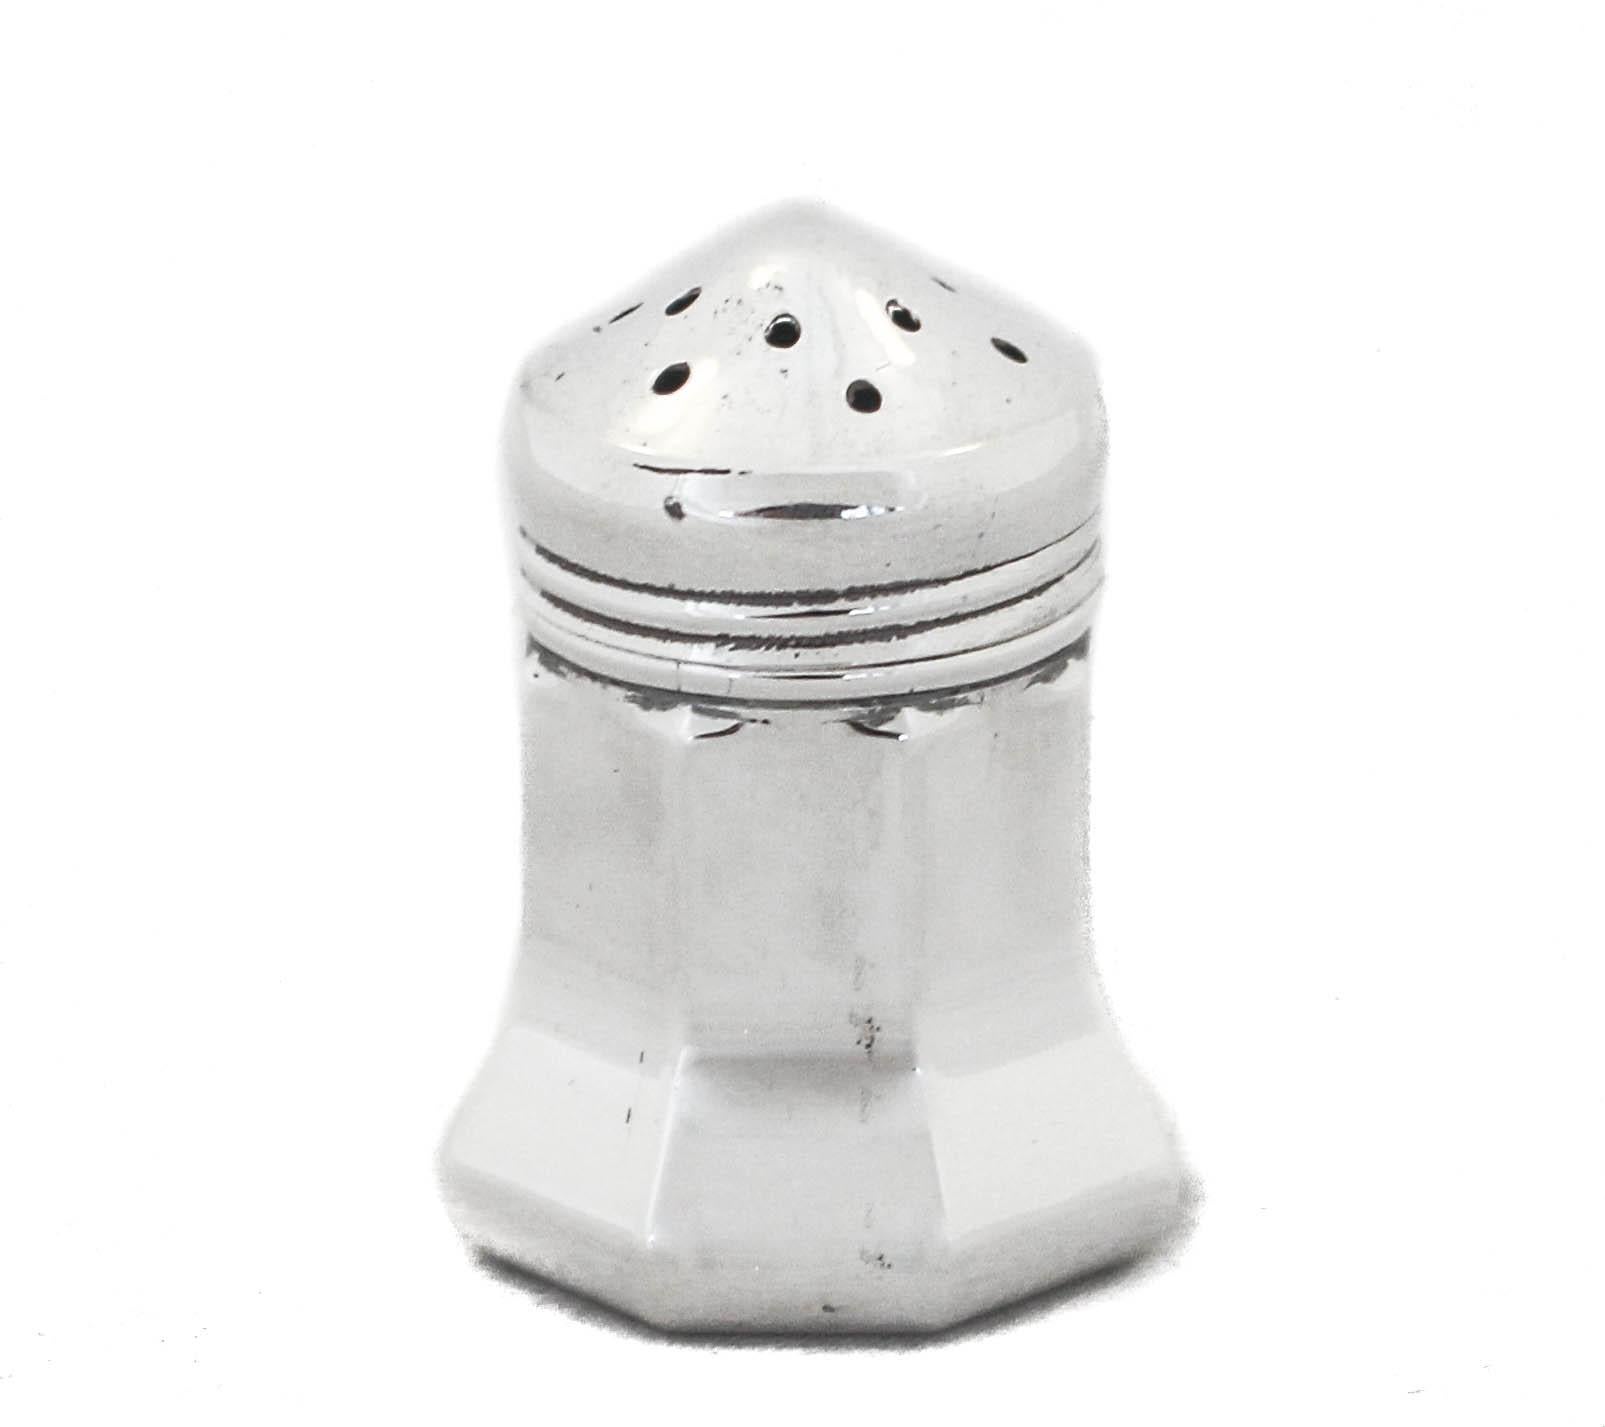 Being offered is a set of eight sterling silver salt shakers made by Cartier.  Each of the eight individual shakers fits into a slot in the original Cartier box (the box is in very good condition).  They have a MidCentury modern shape and look and